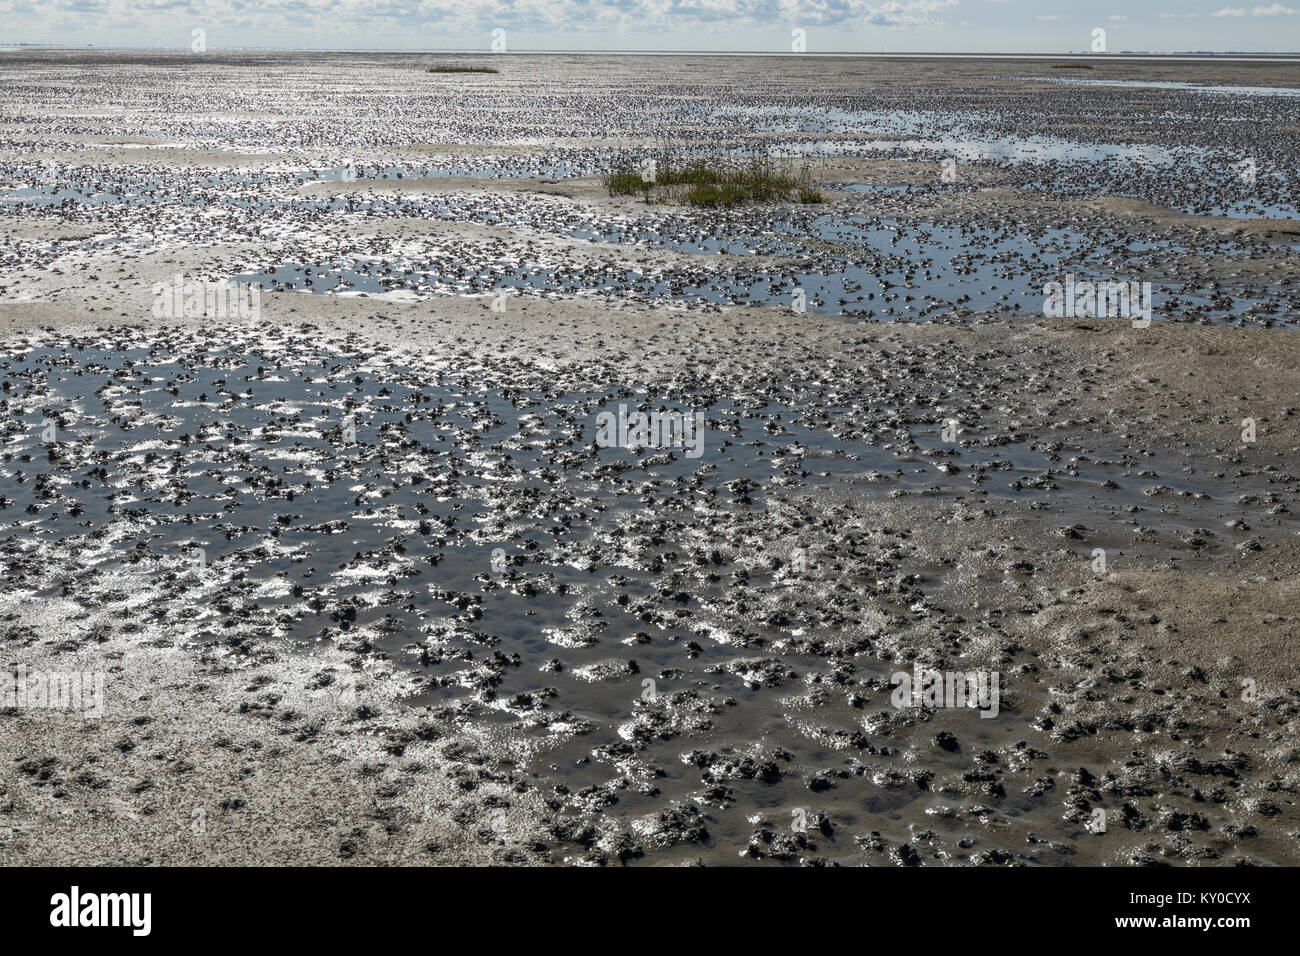 Cast of defaecated sediment of Lugworms (Arenicola marina) at low tide on the tidal flats at Mandoe Stock Photo